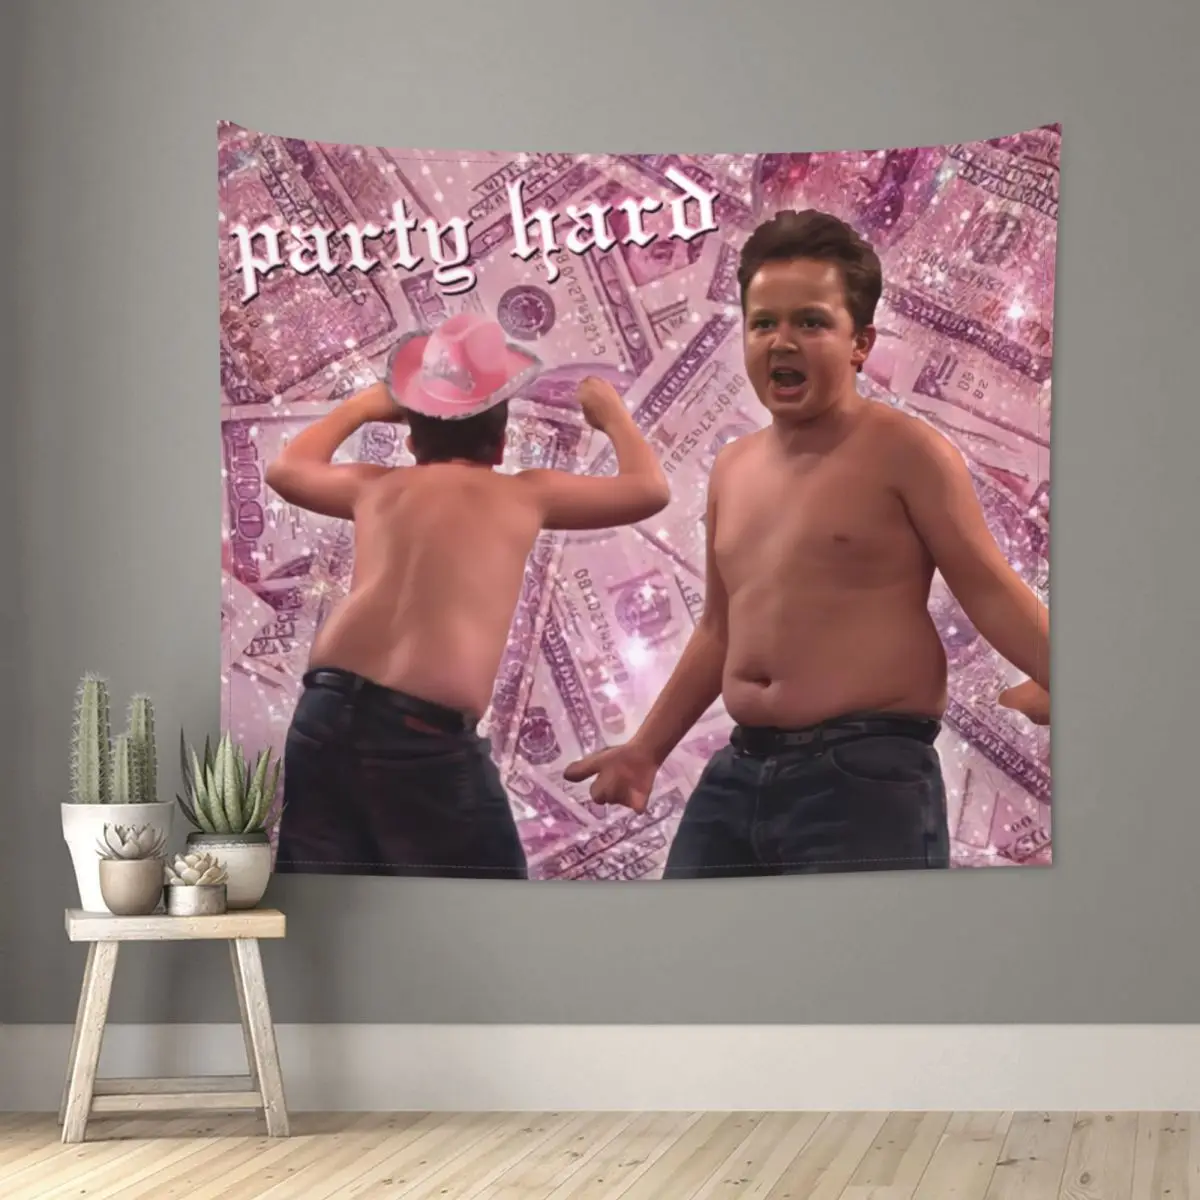 Gibby Icarly - Men's Clothing - Aliexpress - Gibby icarly for you